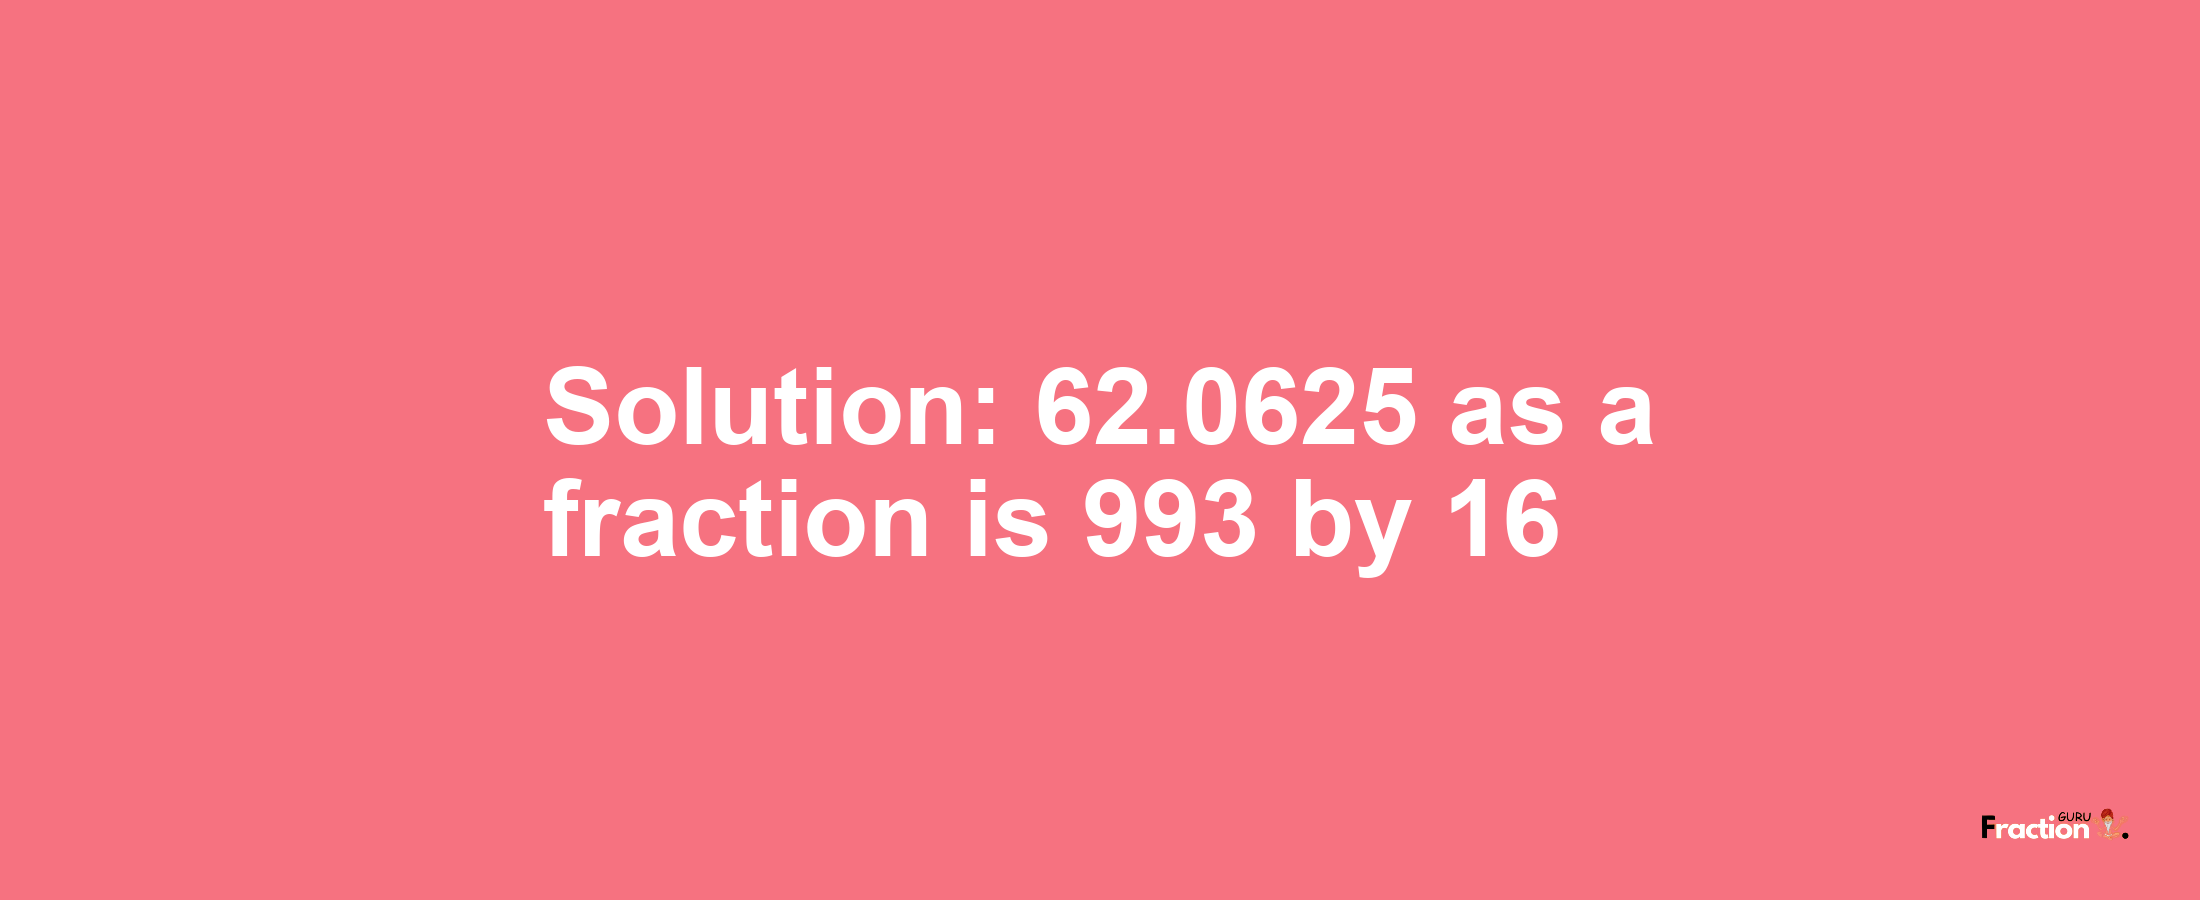 Solution:62.0625 as a fraction is 993/16